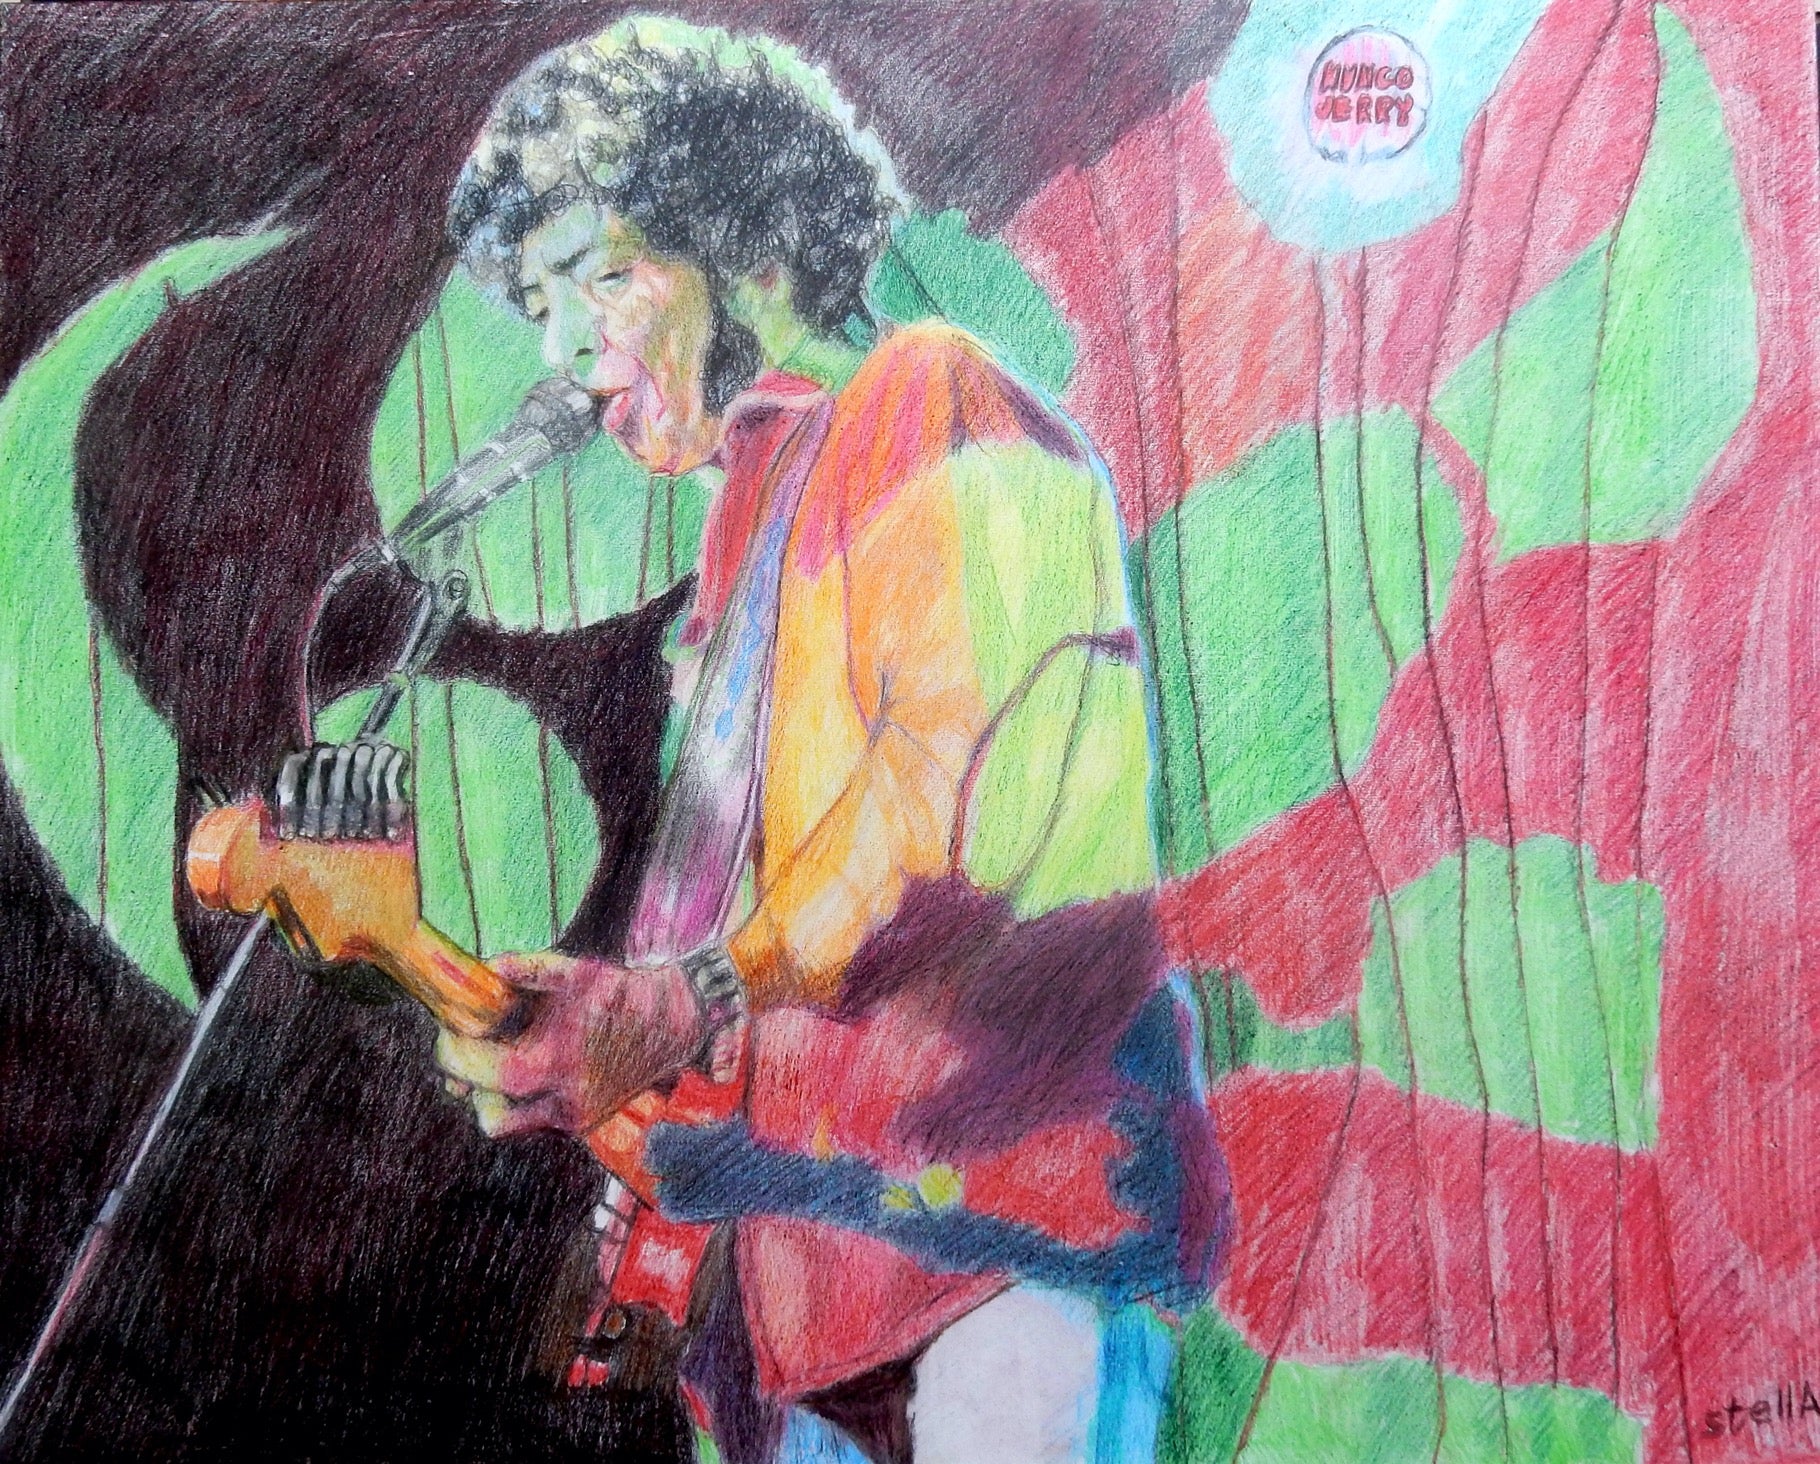 Mungo Jerry pencil on cradled gesso panel by musician artist Stella Tooth